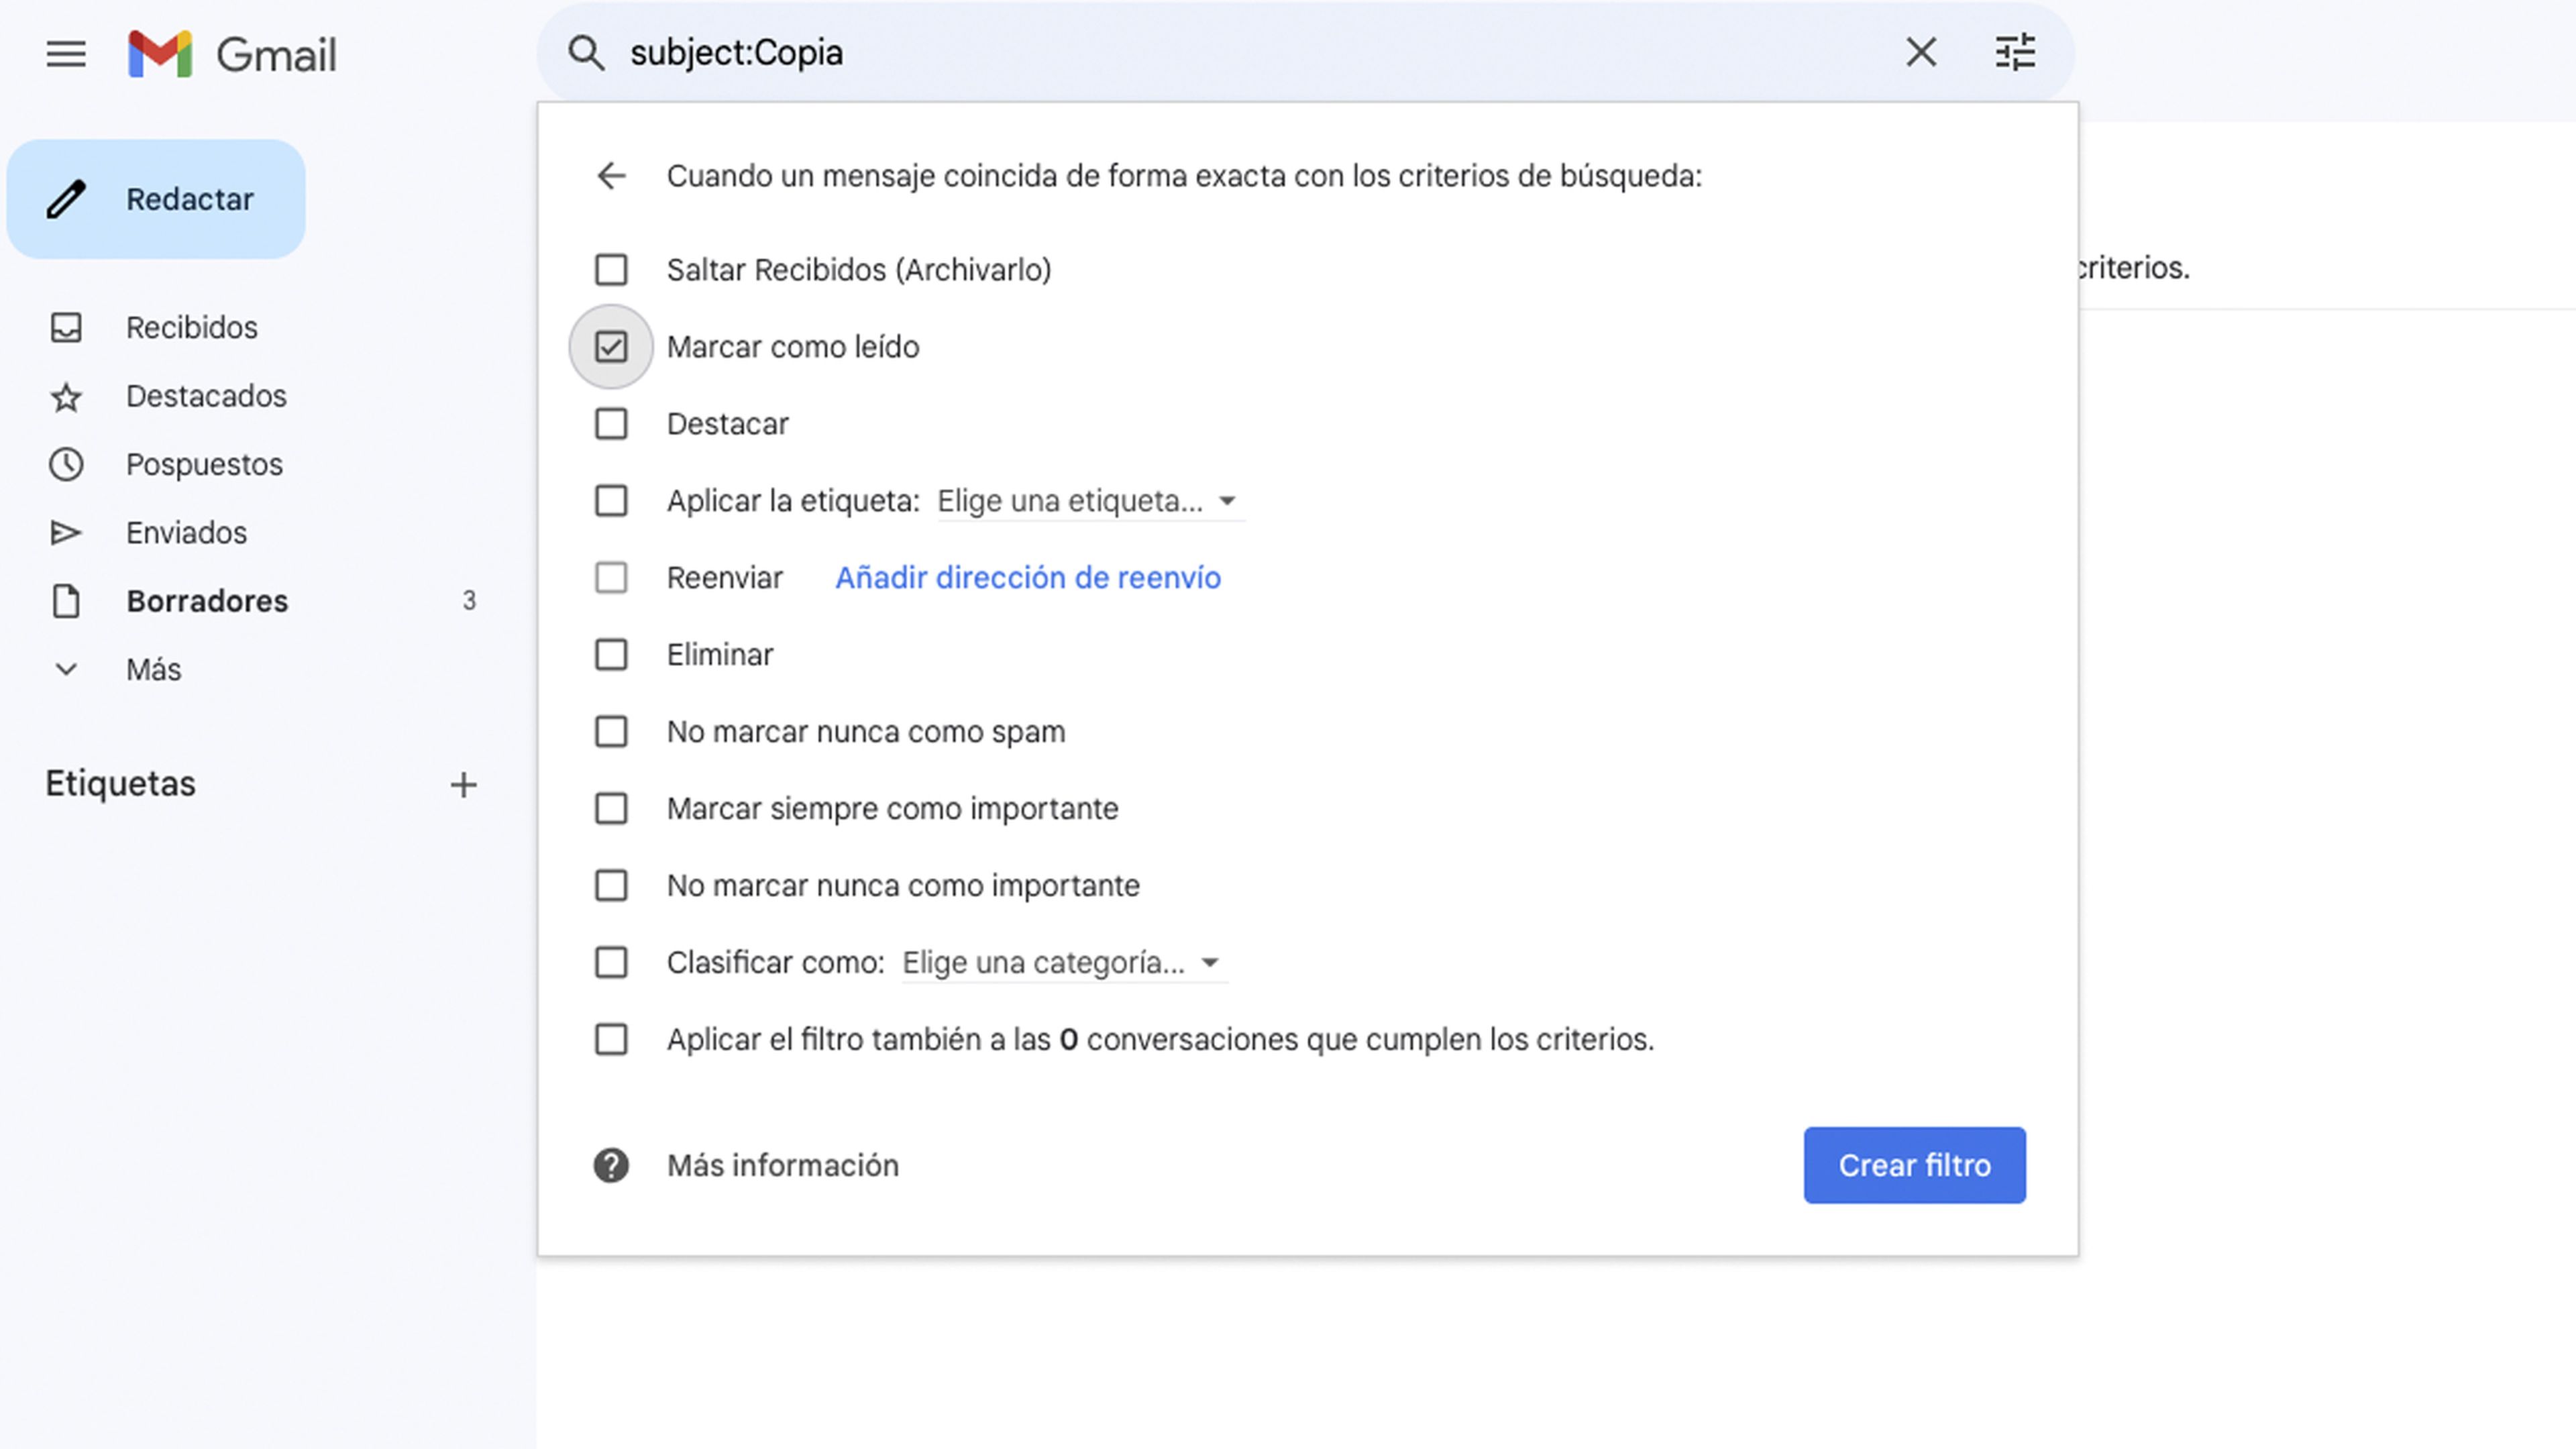 How to create filters in Gmail, in addition to rules